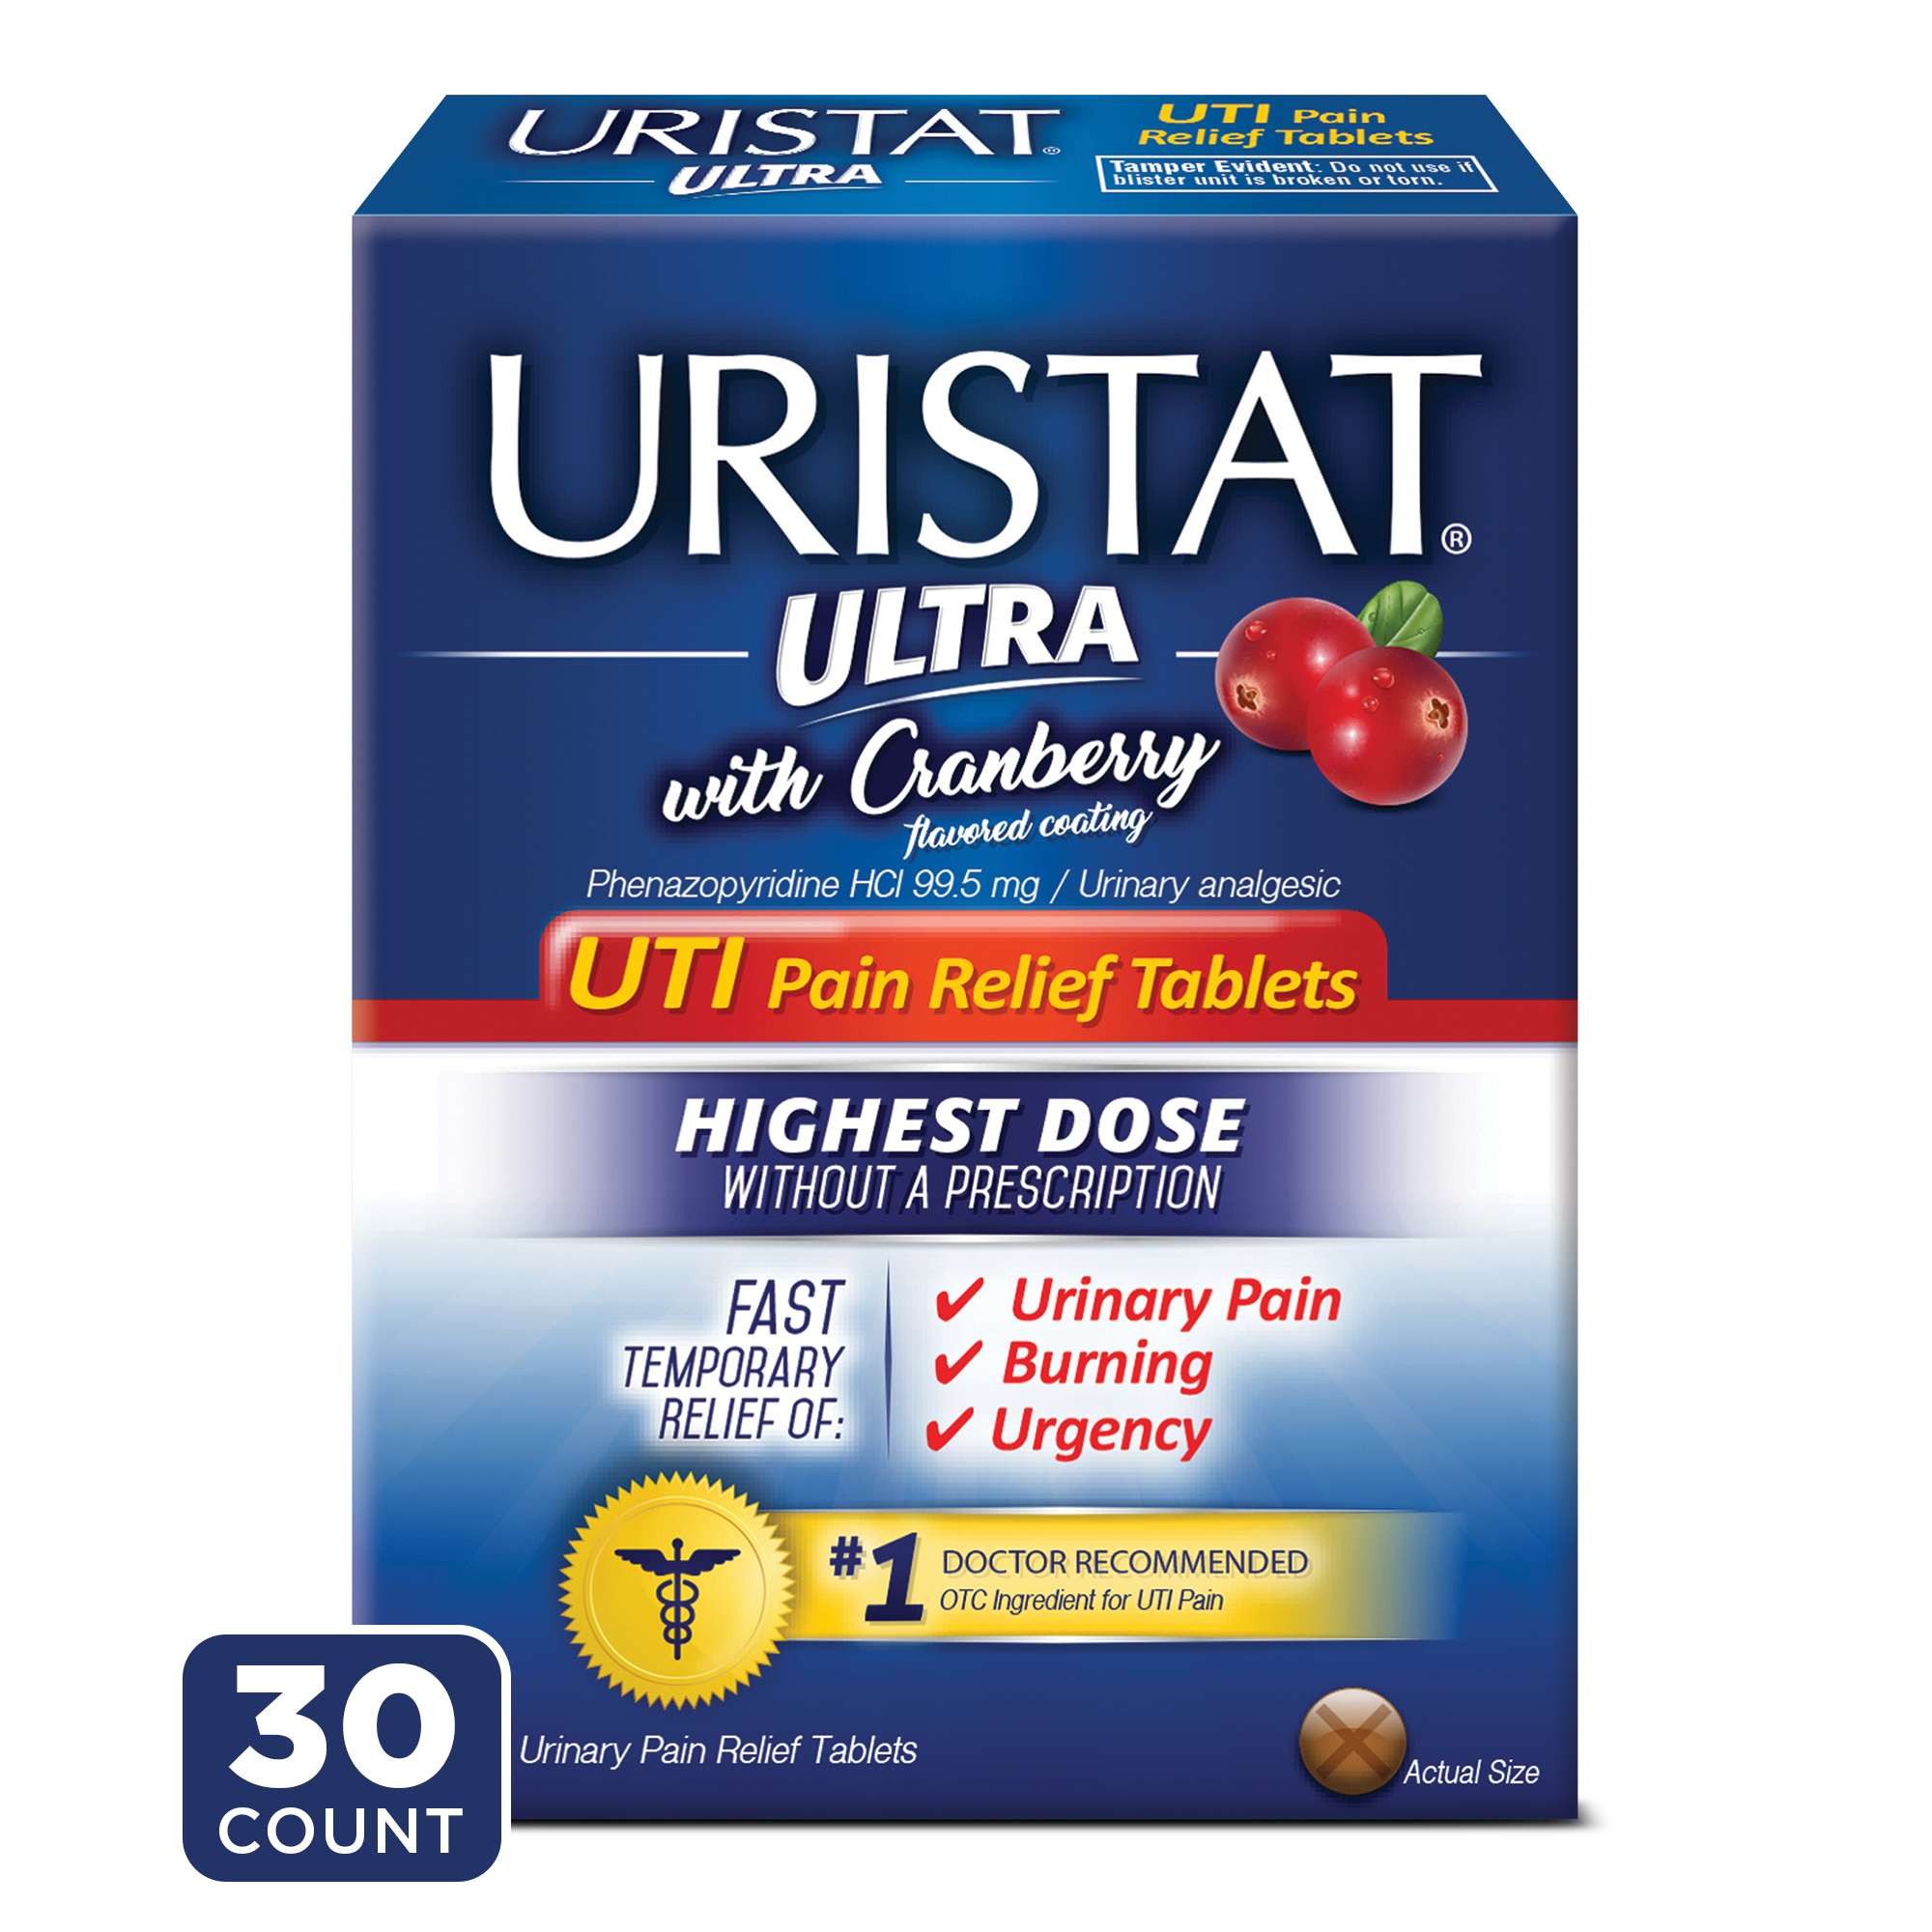 URISTAT Ultra UTI Pain Relief, Cranberry Flavored Coating ...